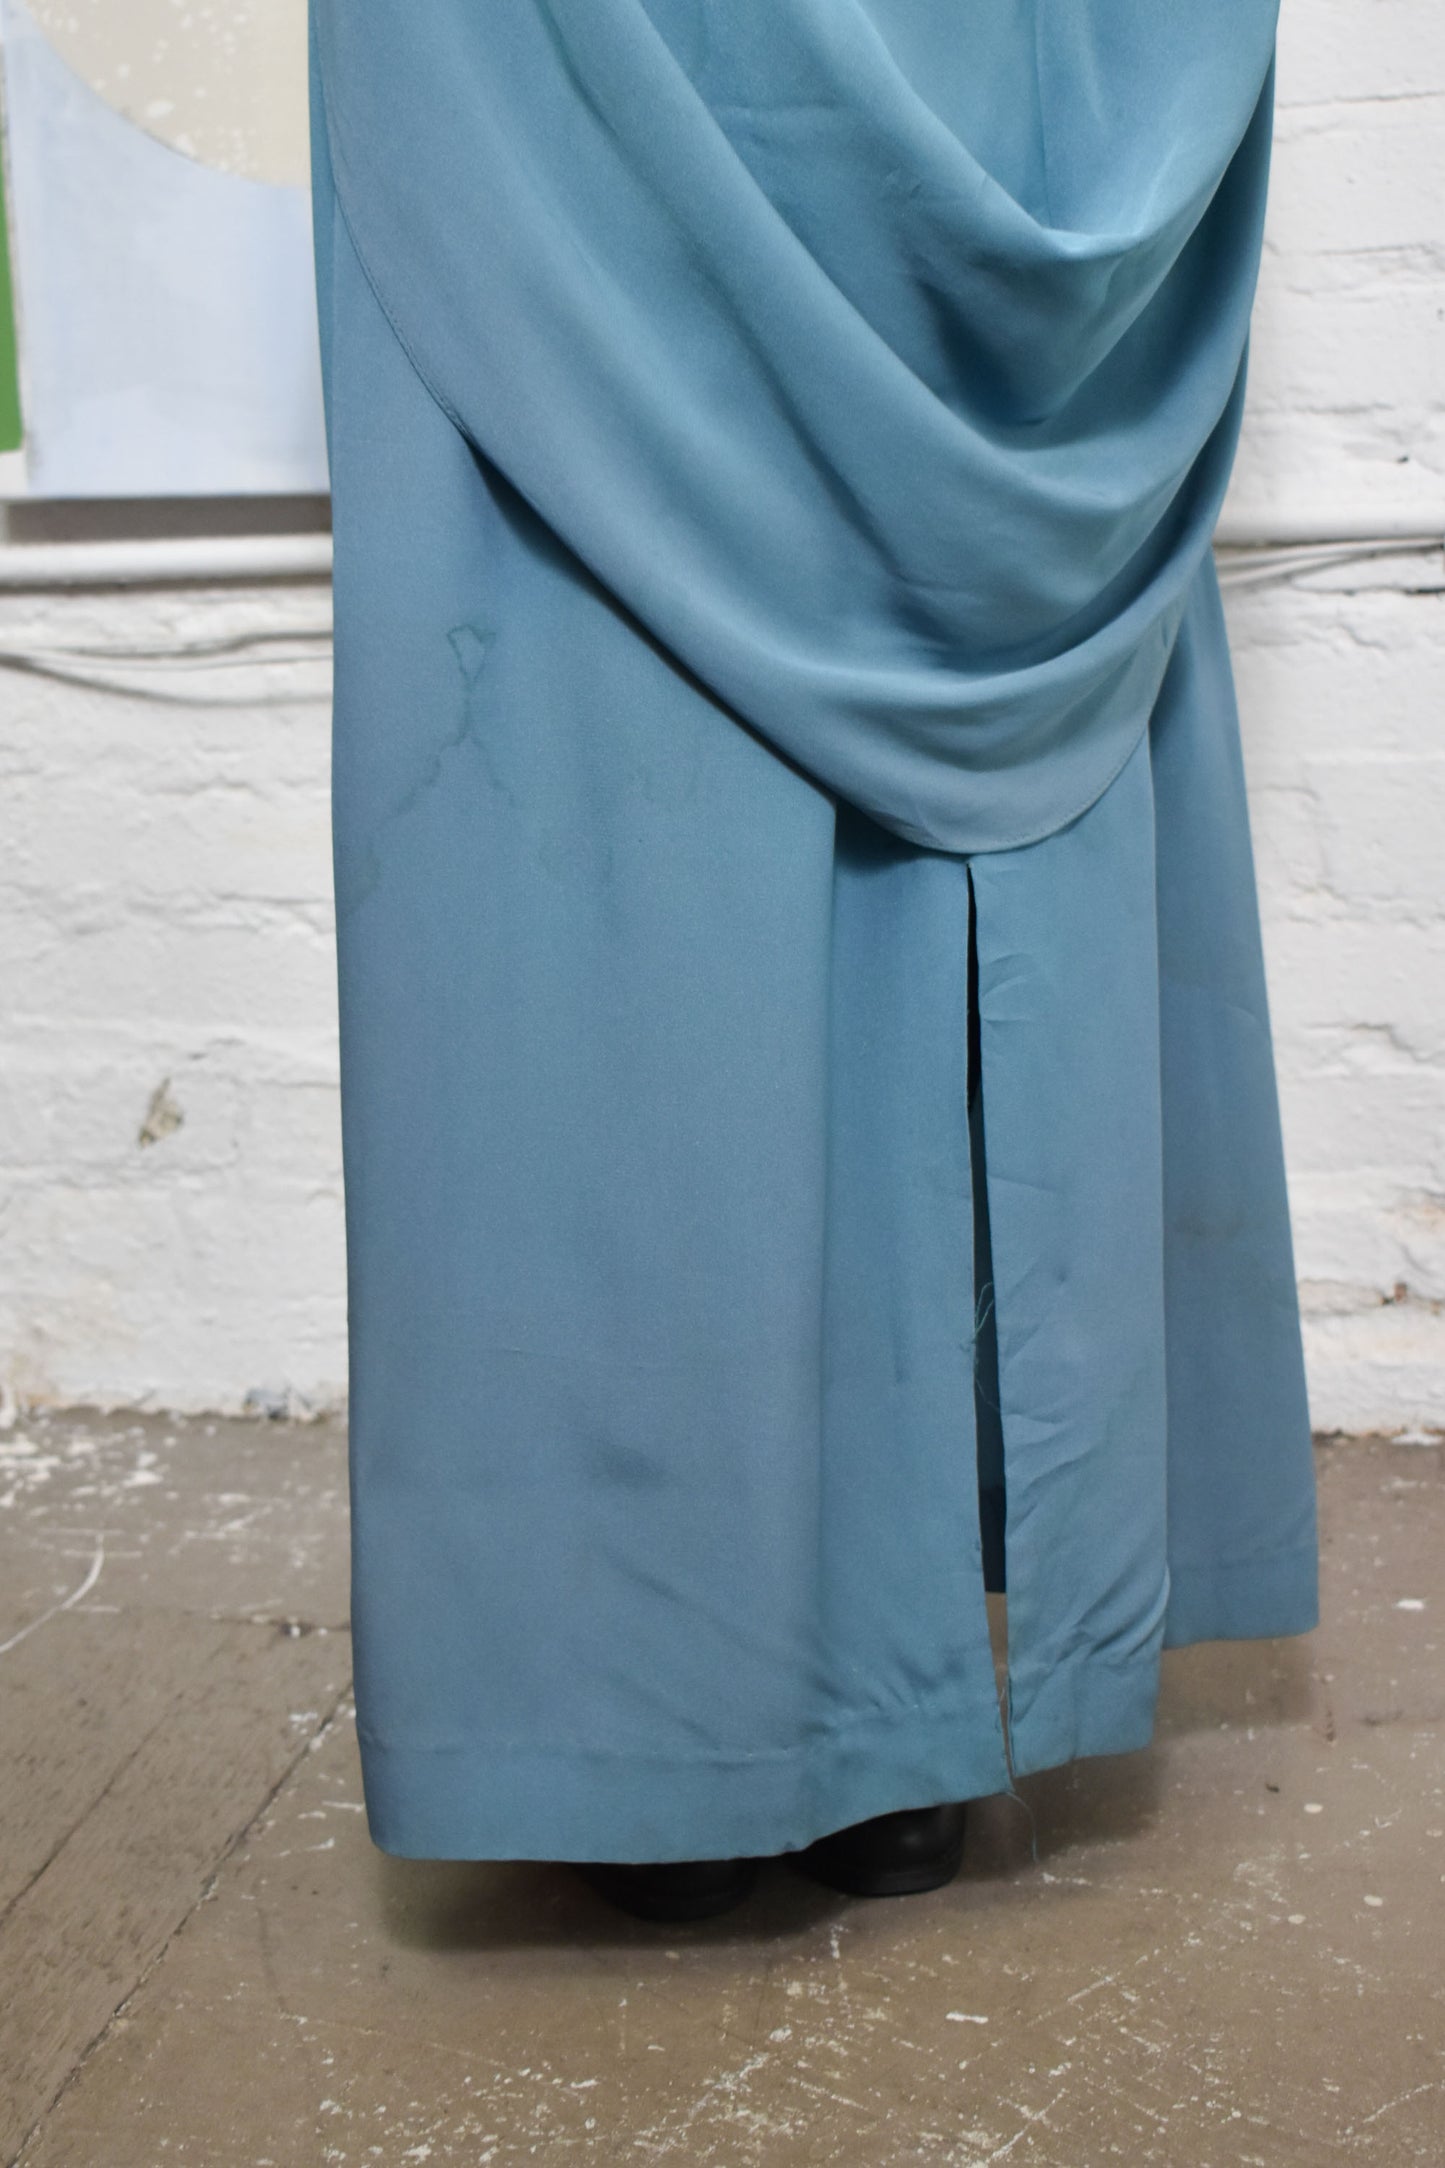 Vintage 1940's "Du Barry" Teal Rayon Gown